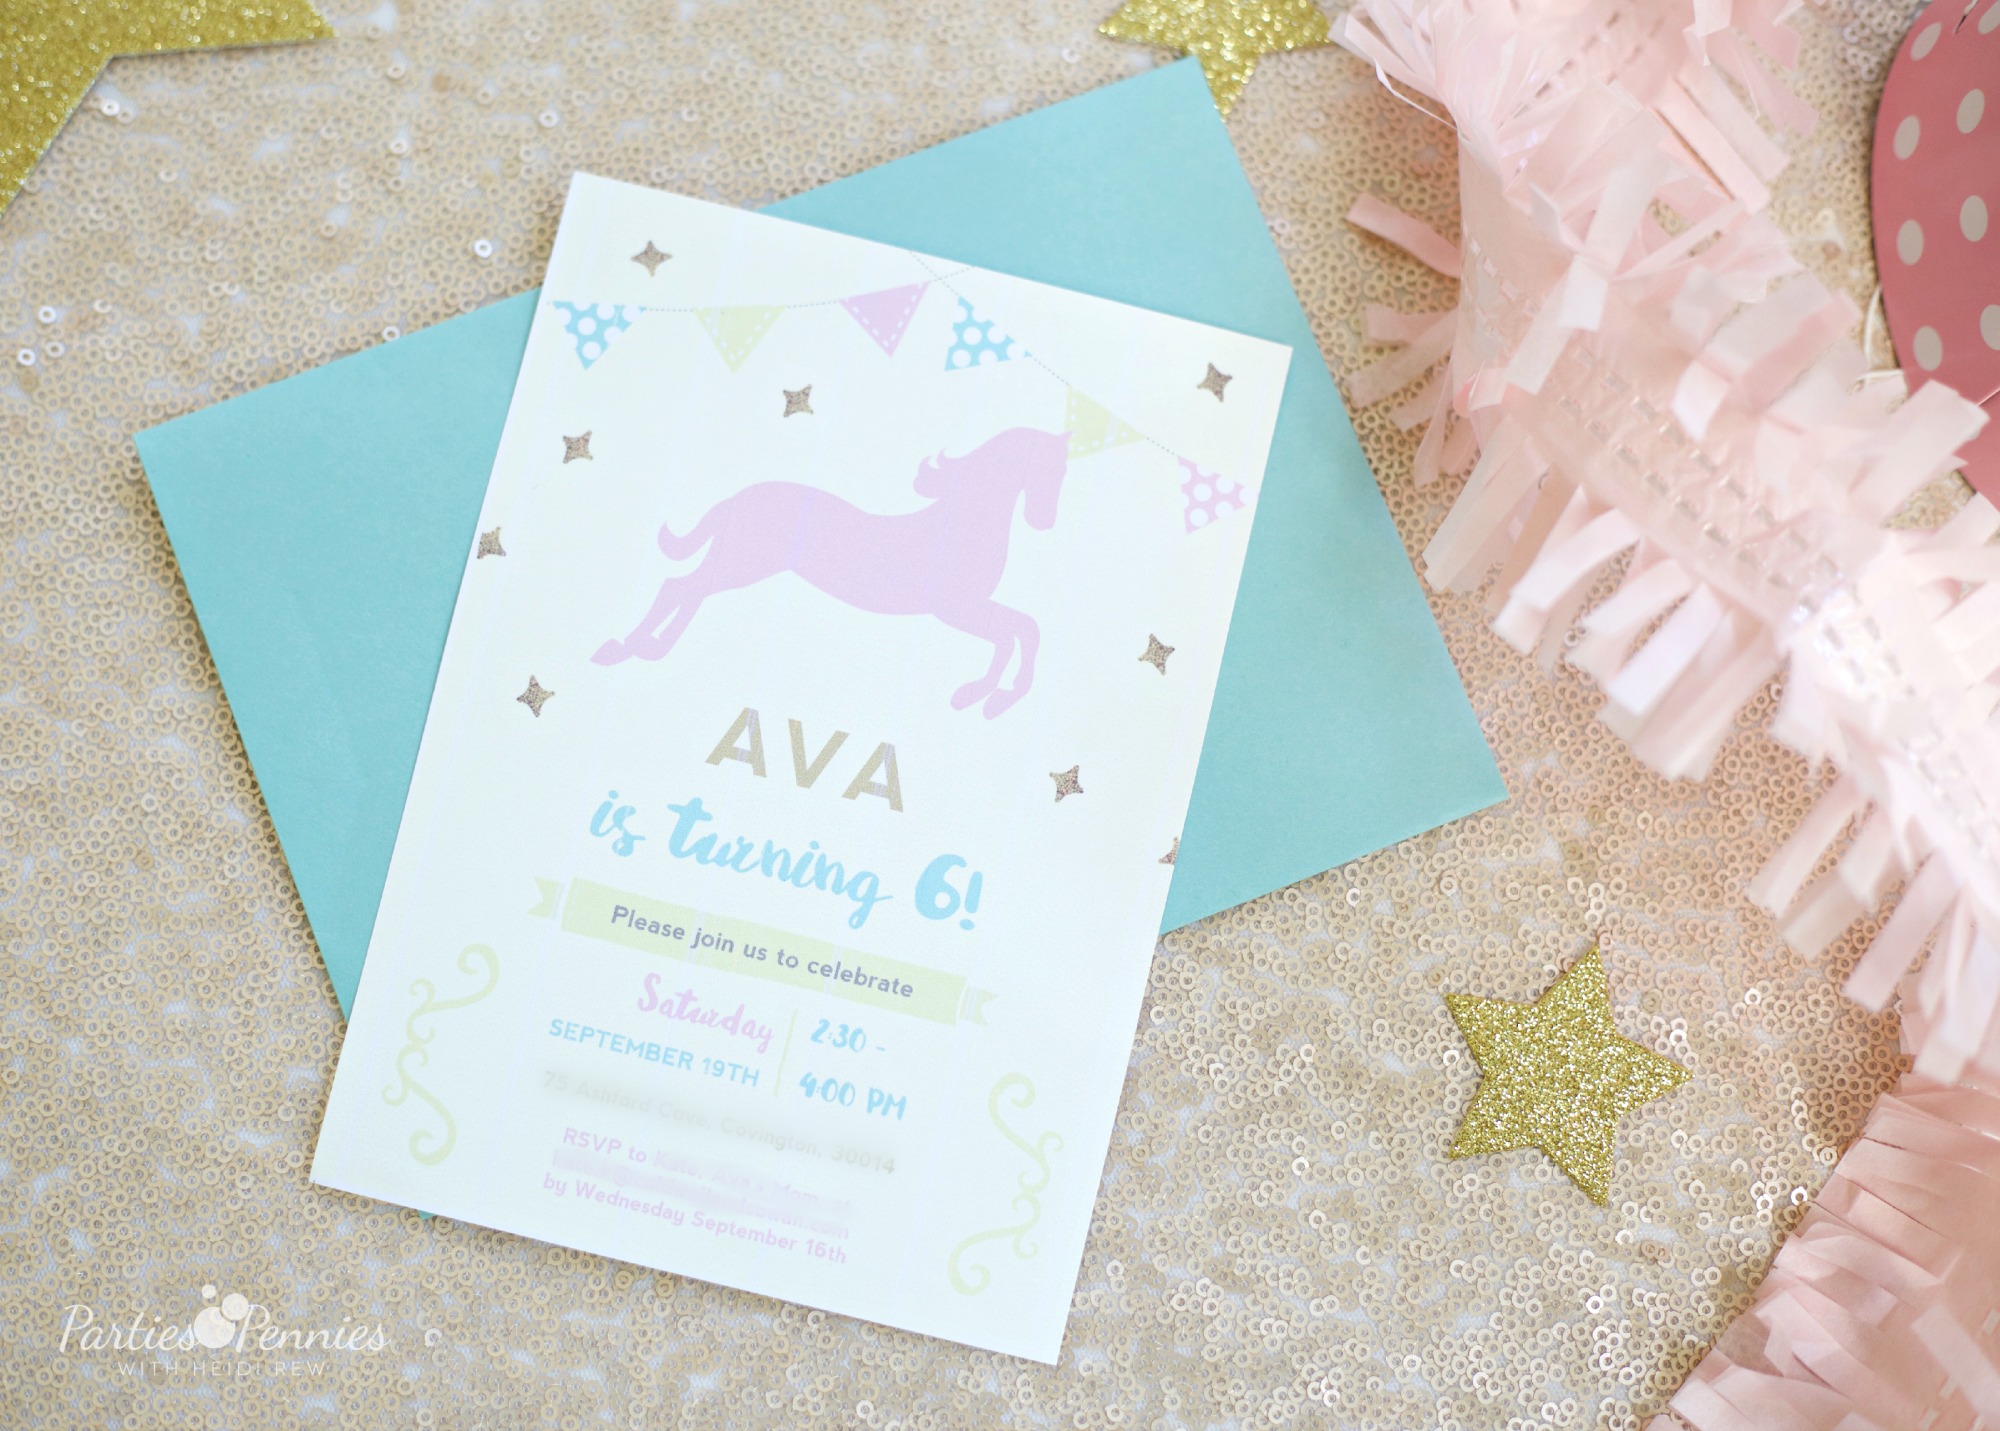 PONY PARTY - Invitations | PartiesforPennies.com | My Little Pony | Pinkie Pie | Girl Birthday Party 